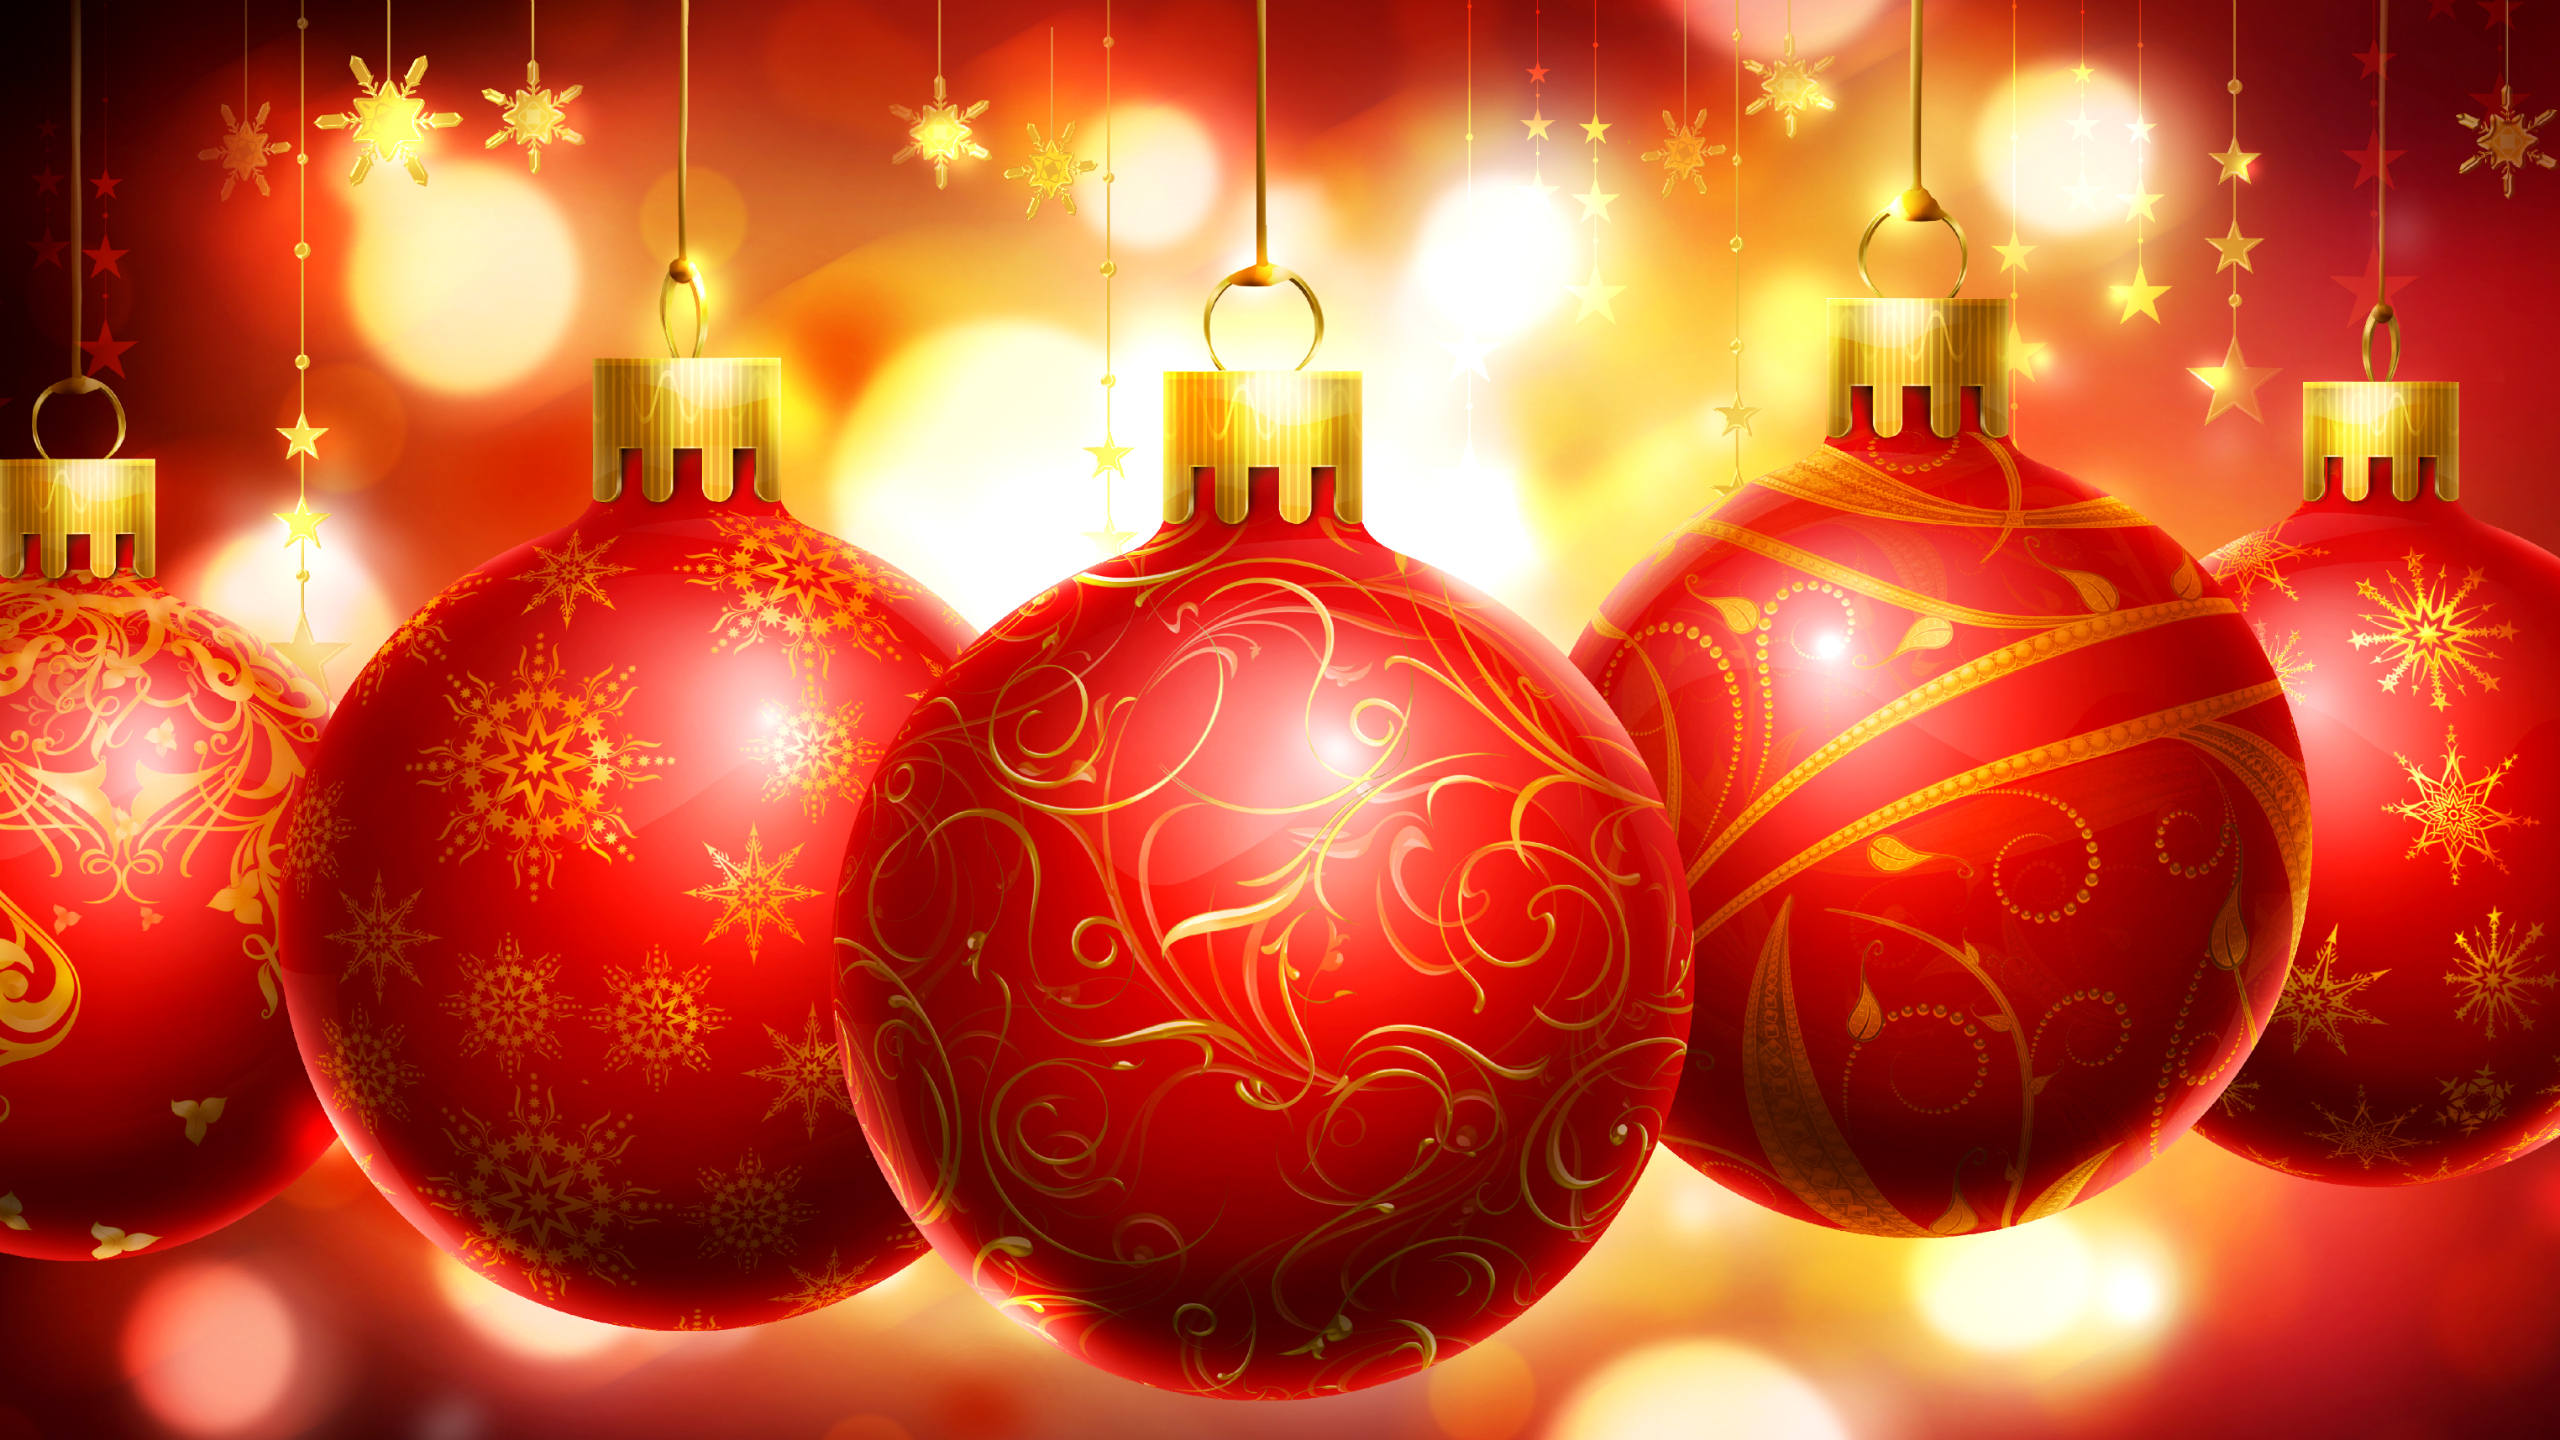 Merry Christmas Christmas Decorations Red Hd Wallpaper For Desktop